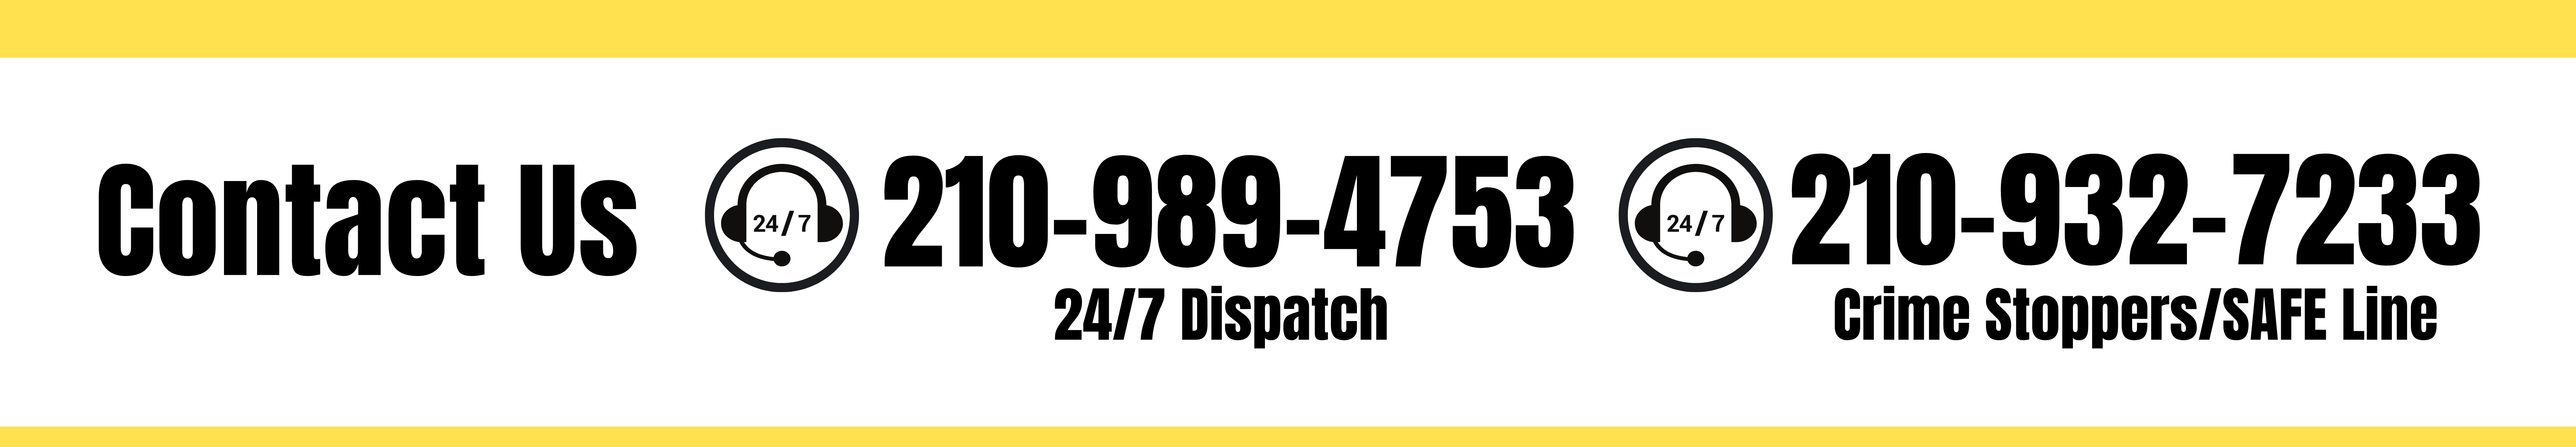 Contact Us: 24/7 Dispatch: 210-989-4753 Crime stoppers/SAFE Line: 210-932-7233